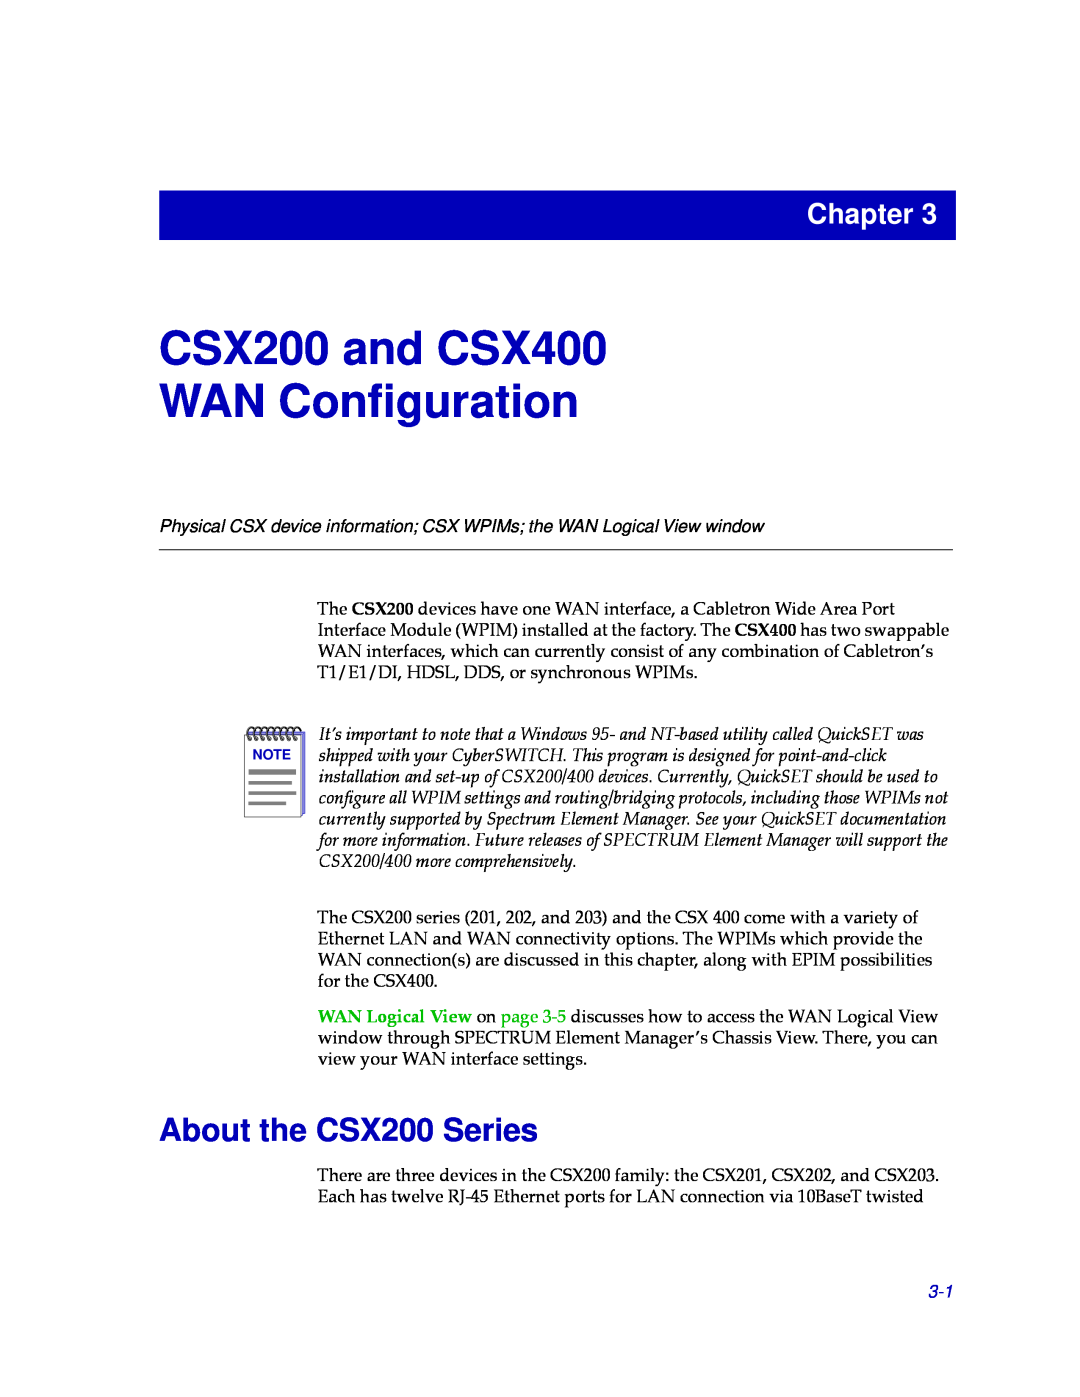 Cabletron Systems manual CSX200 and CSX400 WAN Conﬁguration, About the CSX200 Series, Chapter 